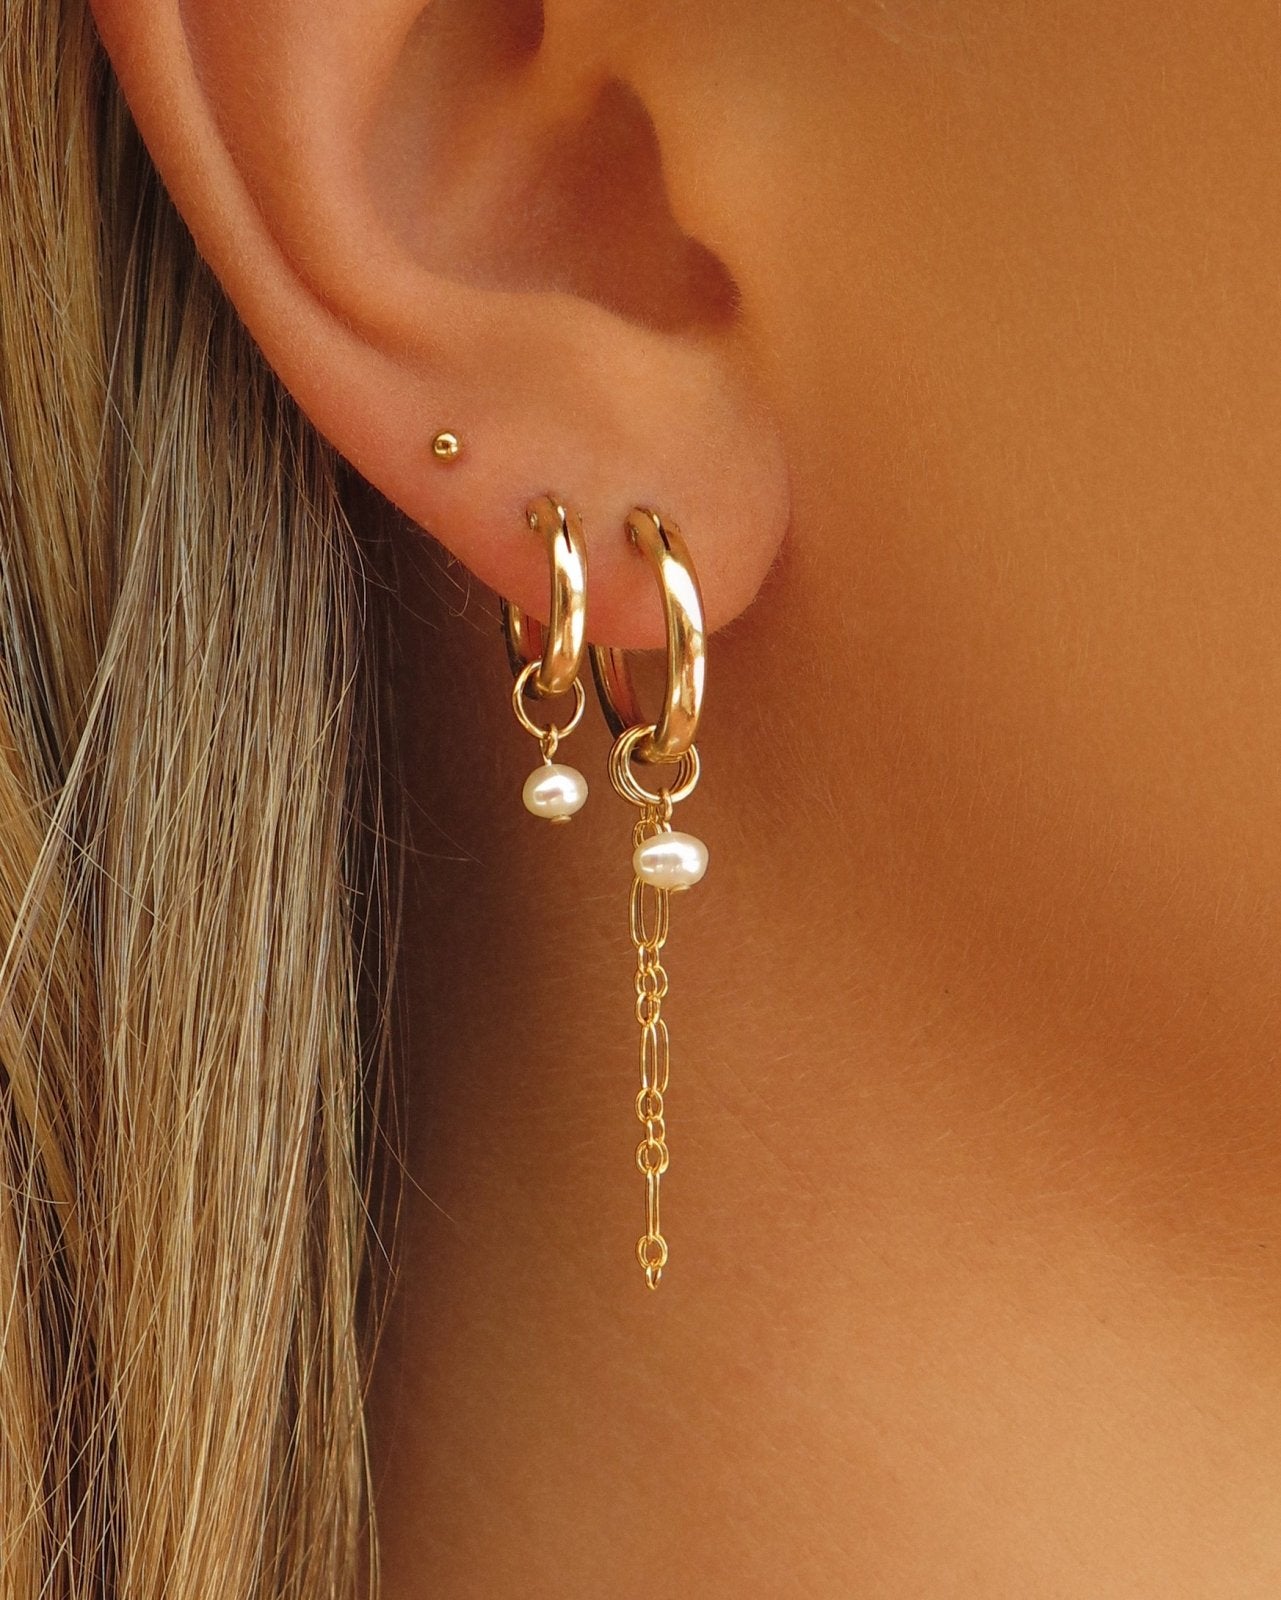 THICK DOUBLE PIERCING FRESHWATER PEARL HOOP EARRINGS- 14k Yellow Gold - The Littl - 12mm (both pairs) - 14k Yellow Gold Fill